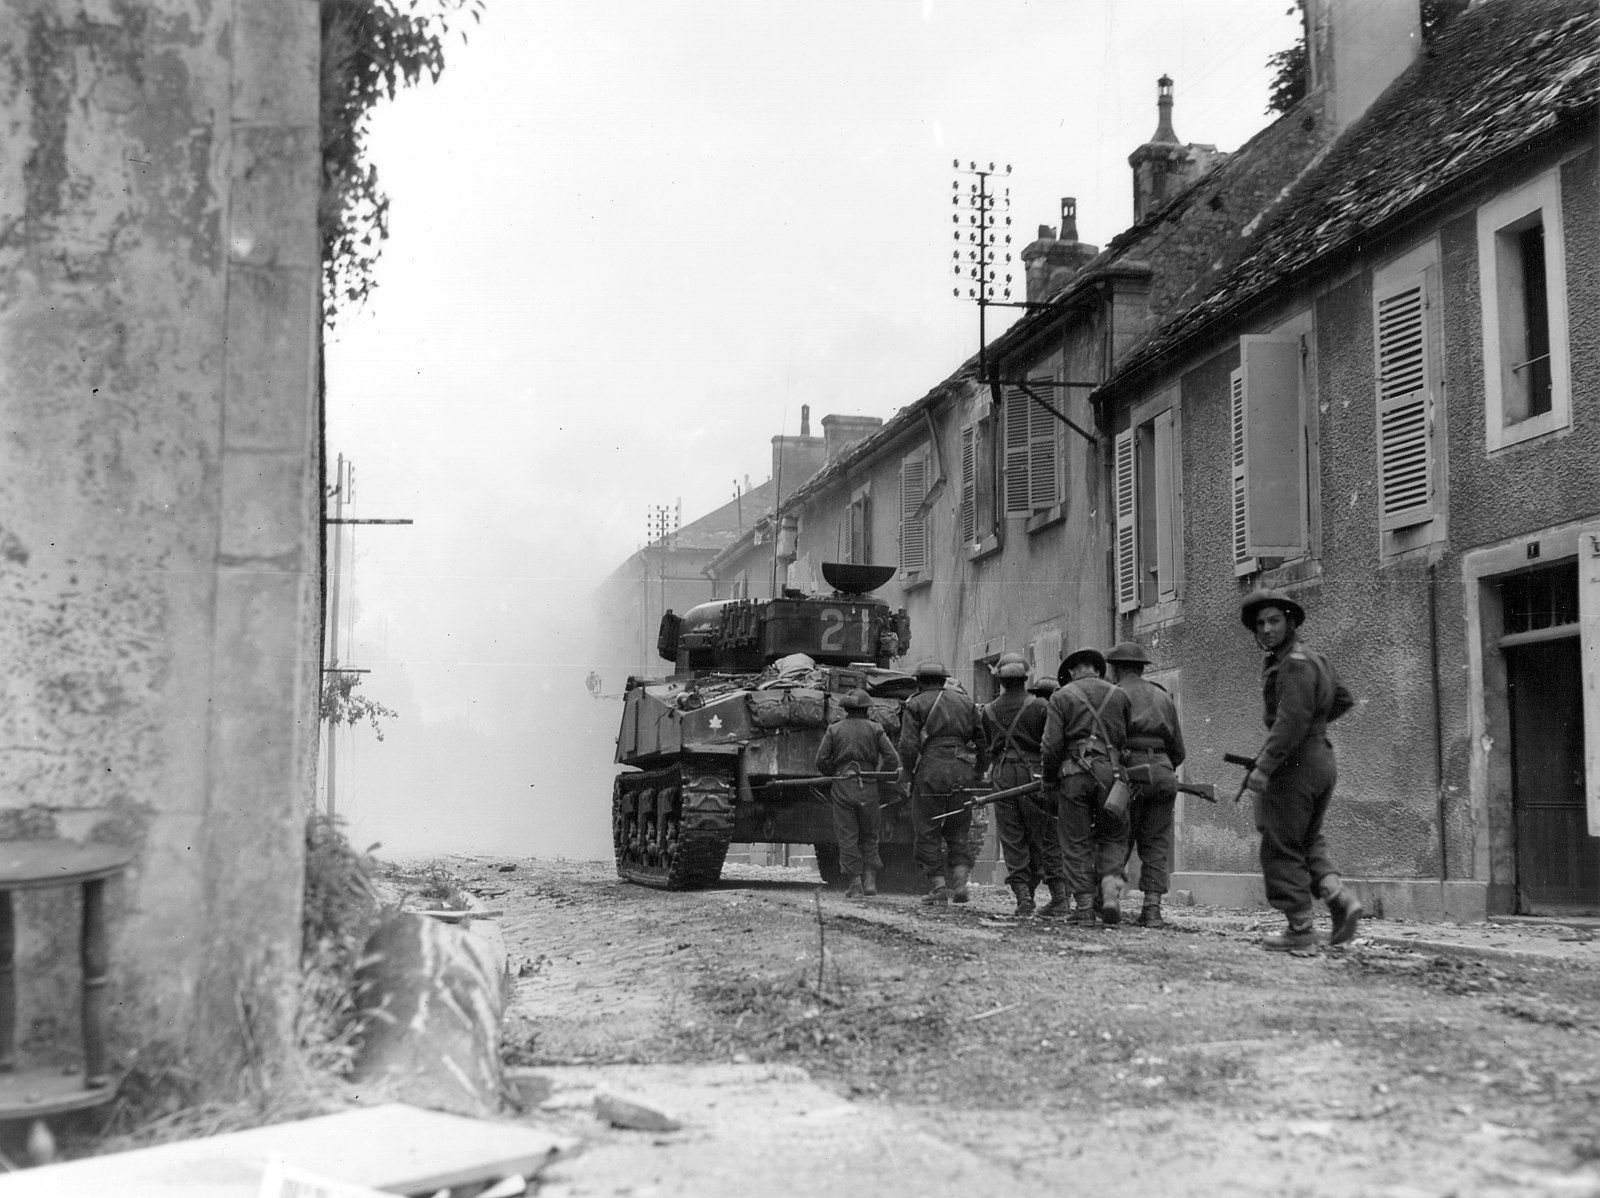 The Canadians advancing in Falaise